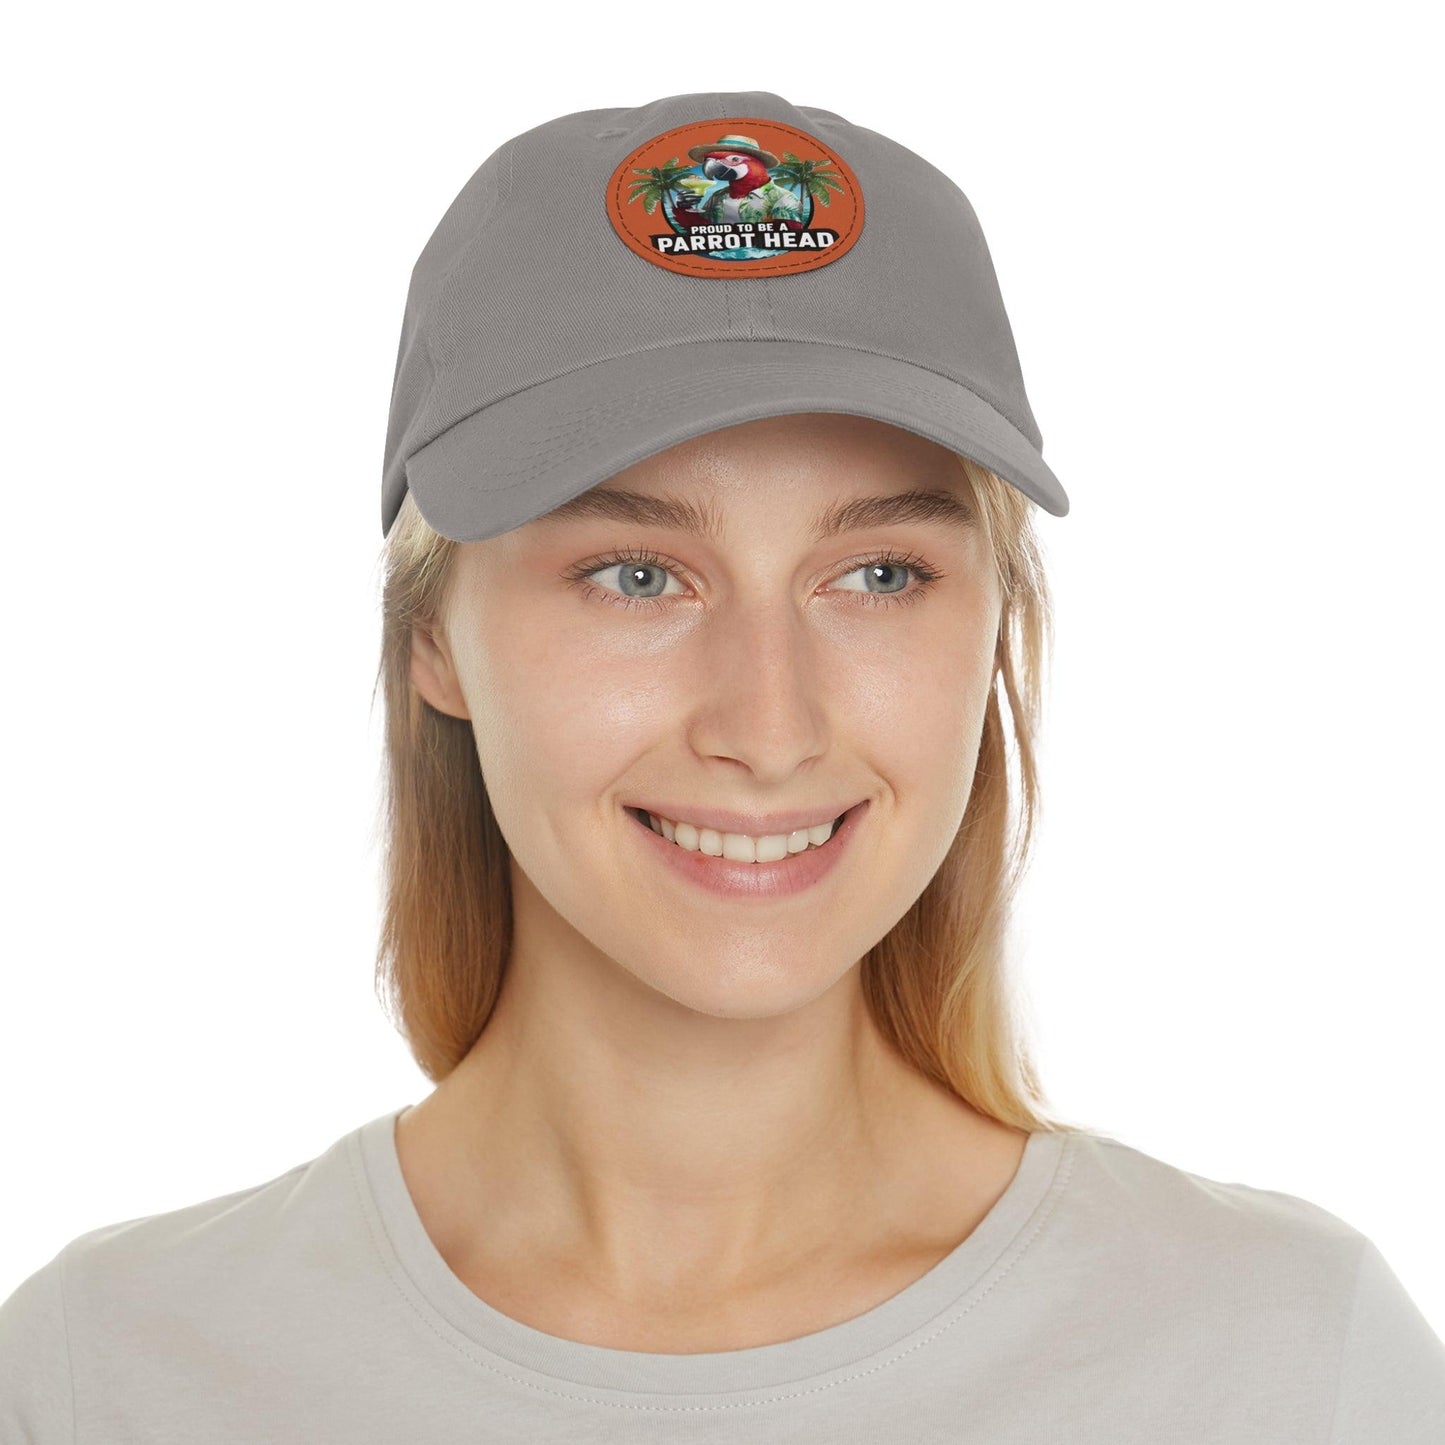 Proud to Be a Parrot Head Cap, Beach Hair Day Hat - Coastal Collections